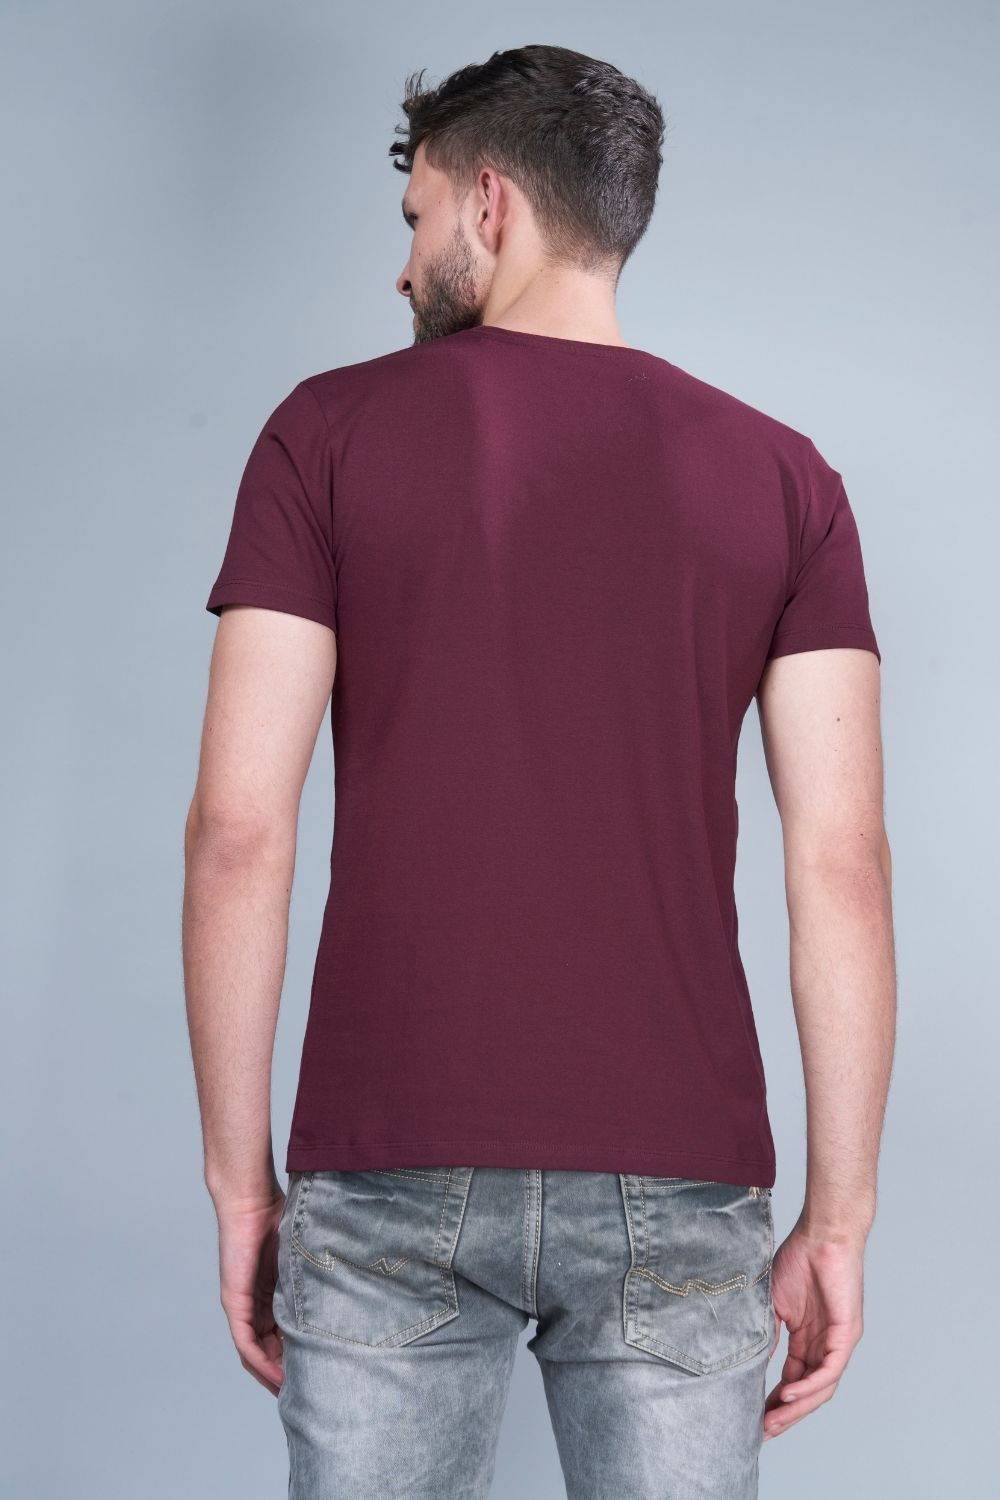 Heng Maroon colored, Solid T shirt for men, with half sleeves and round neck, back view.